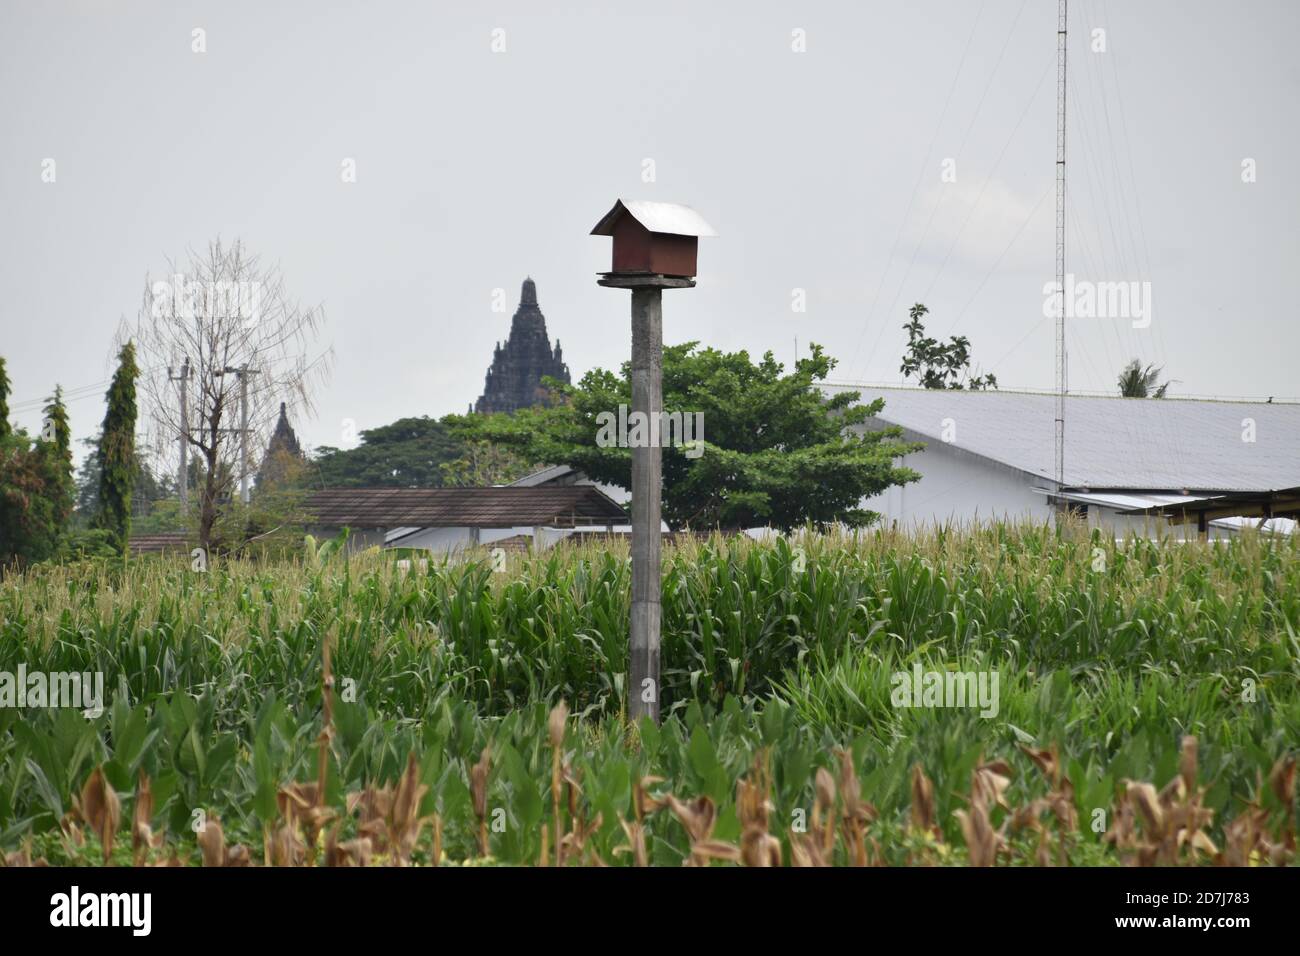 Indonesian local wisdom: Owl house in the middle of agricultural land, to get rid rat pests, looks behind it is Prambanan temple. Stock Photo